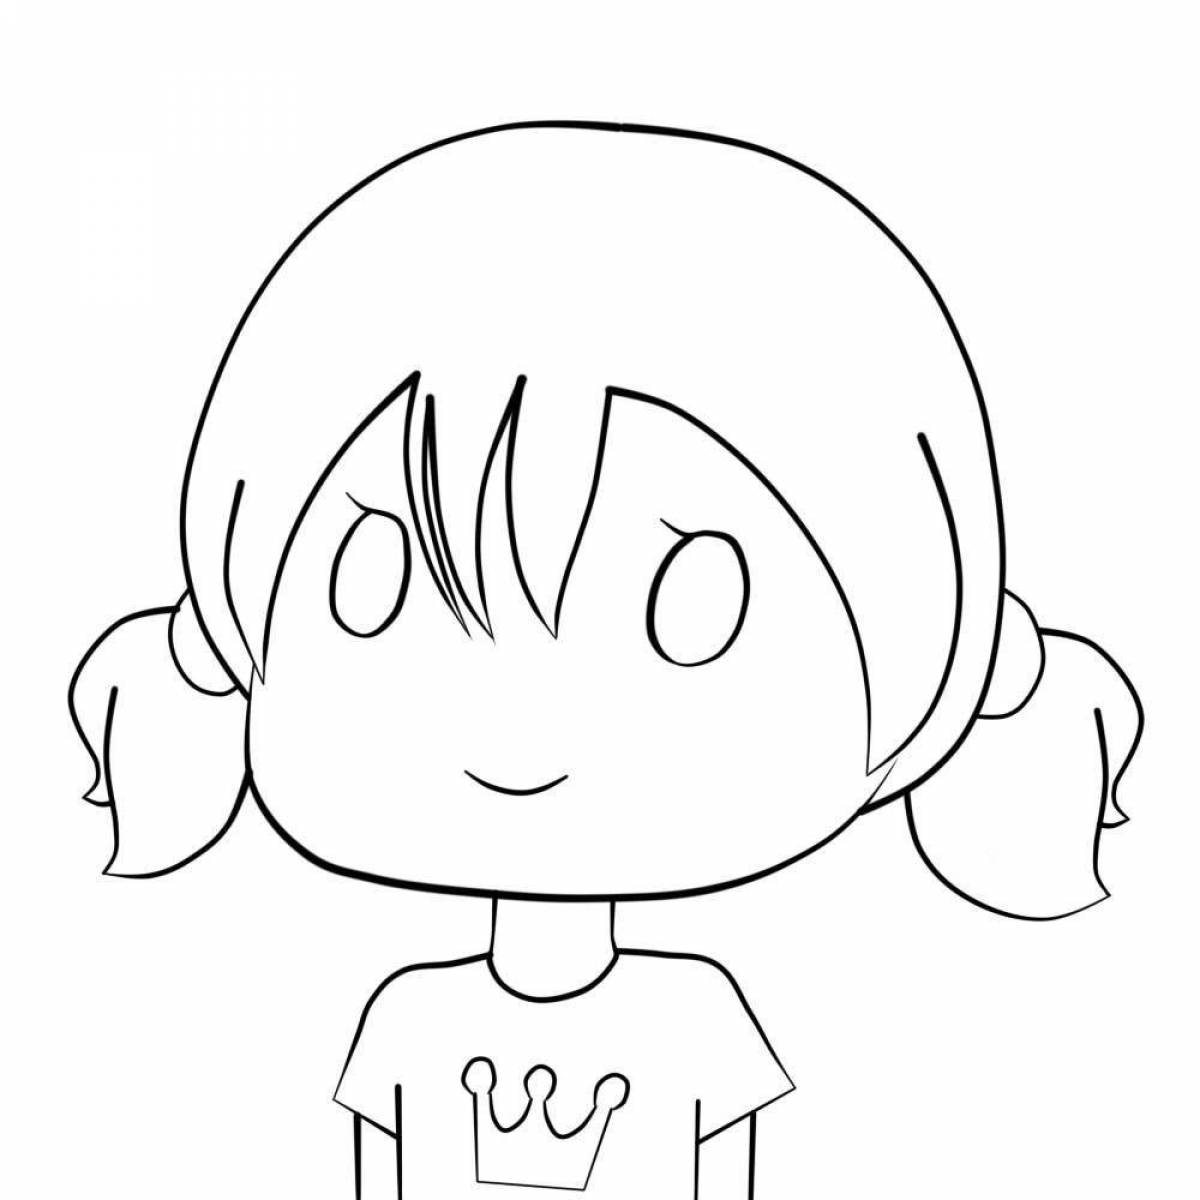 Exquisite chibi anime coloring page